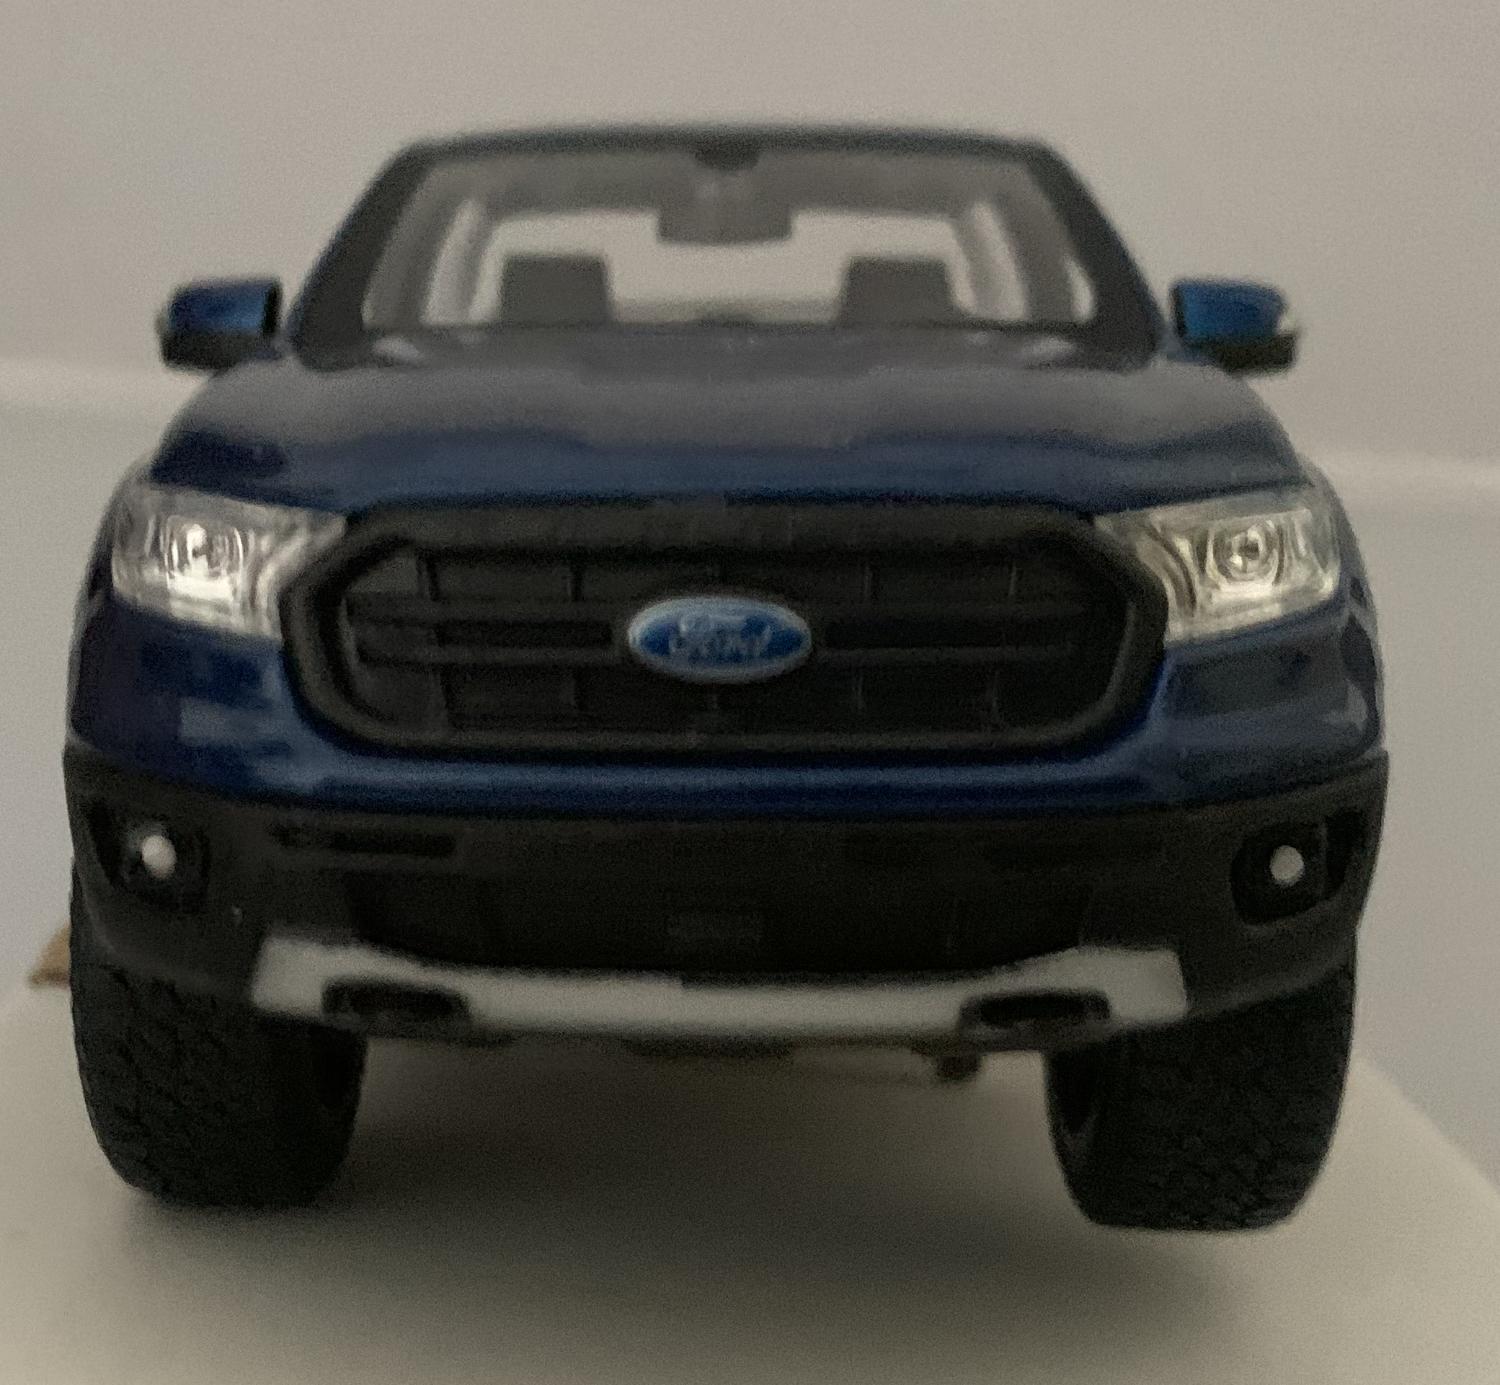 A good reproduction of the Ford Ranger with detail throughout, all authentically recreated.  The model is presented in a window display box, the car is approx. 19.5 cm long and the presentation box is 24 cm long